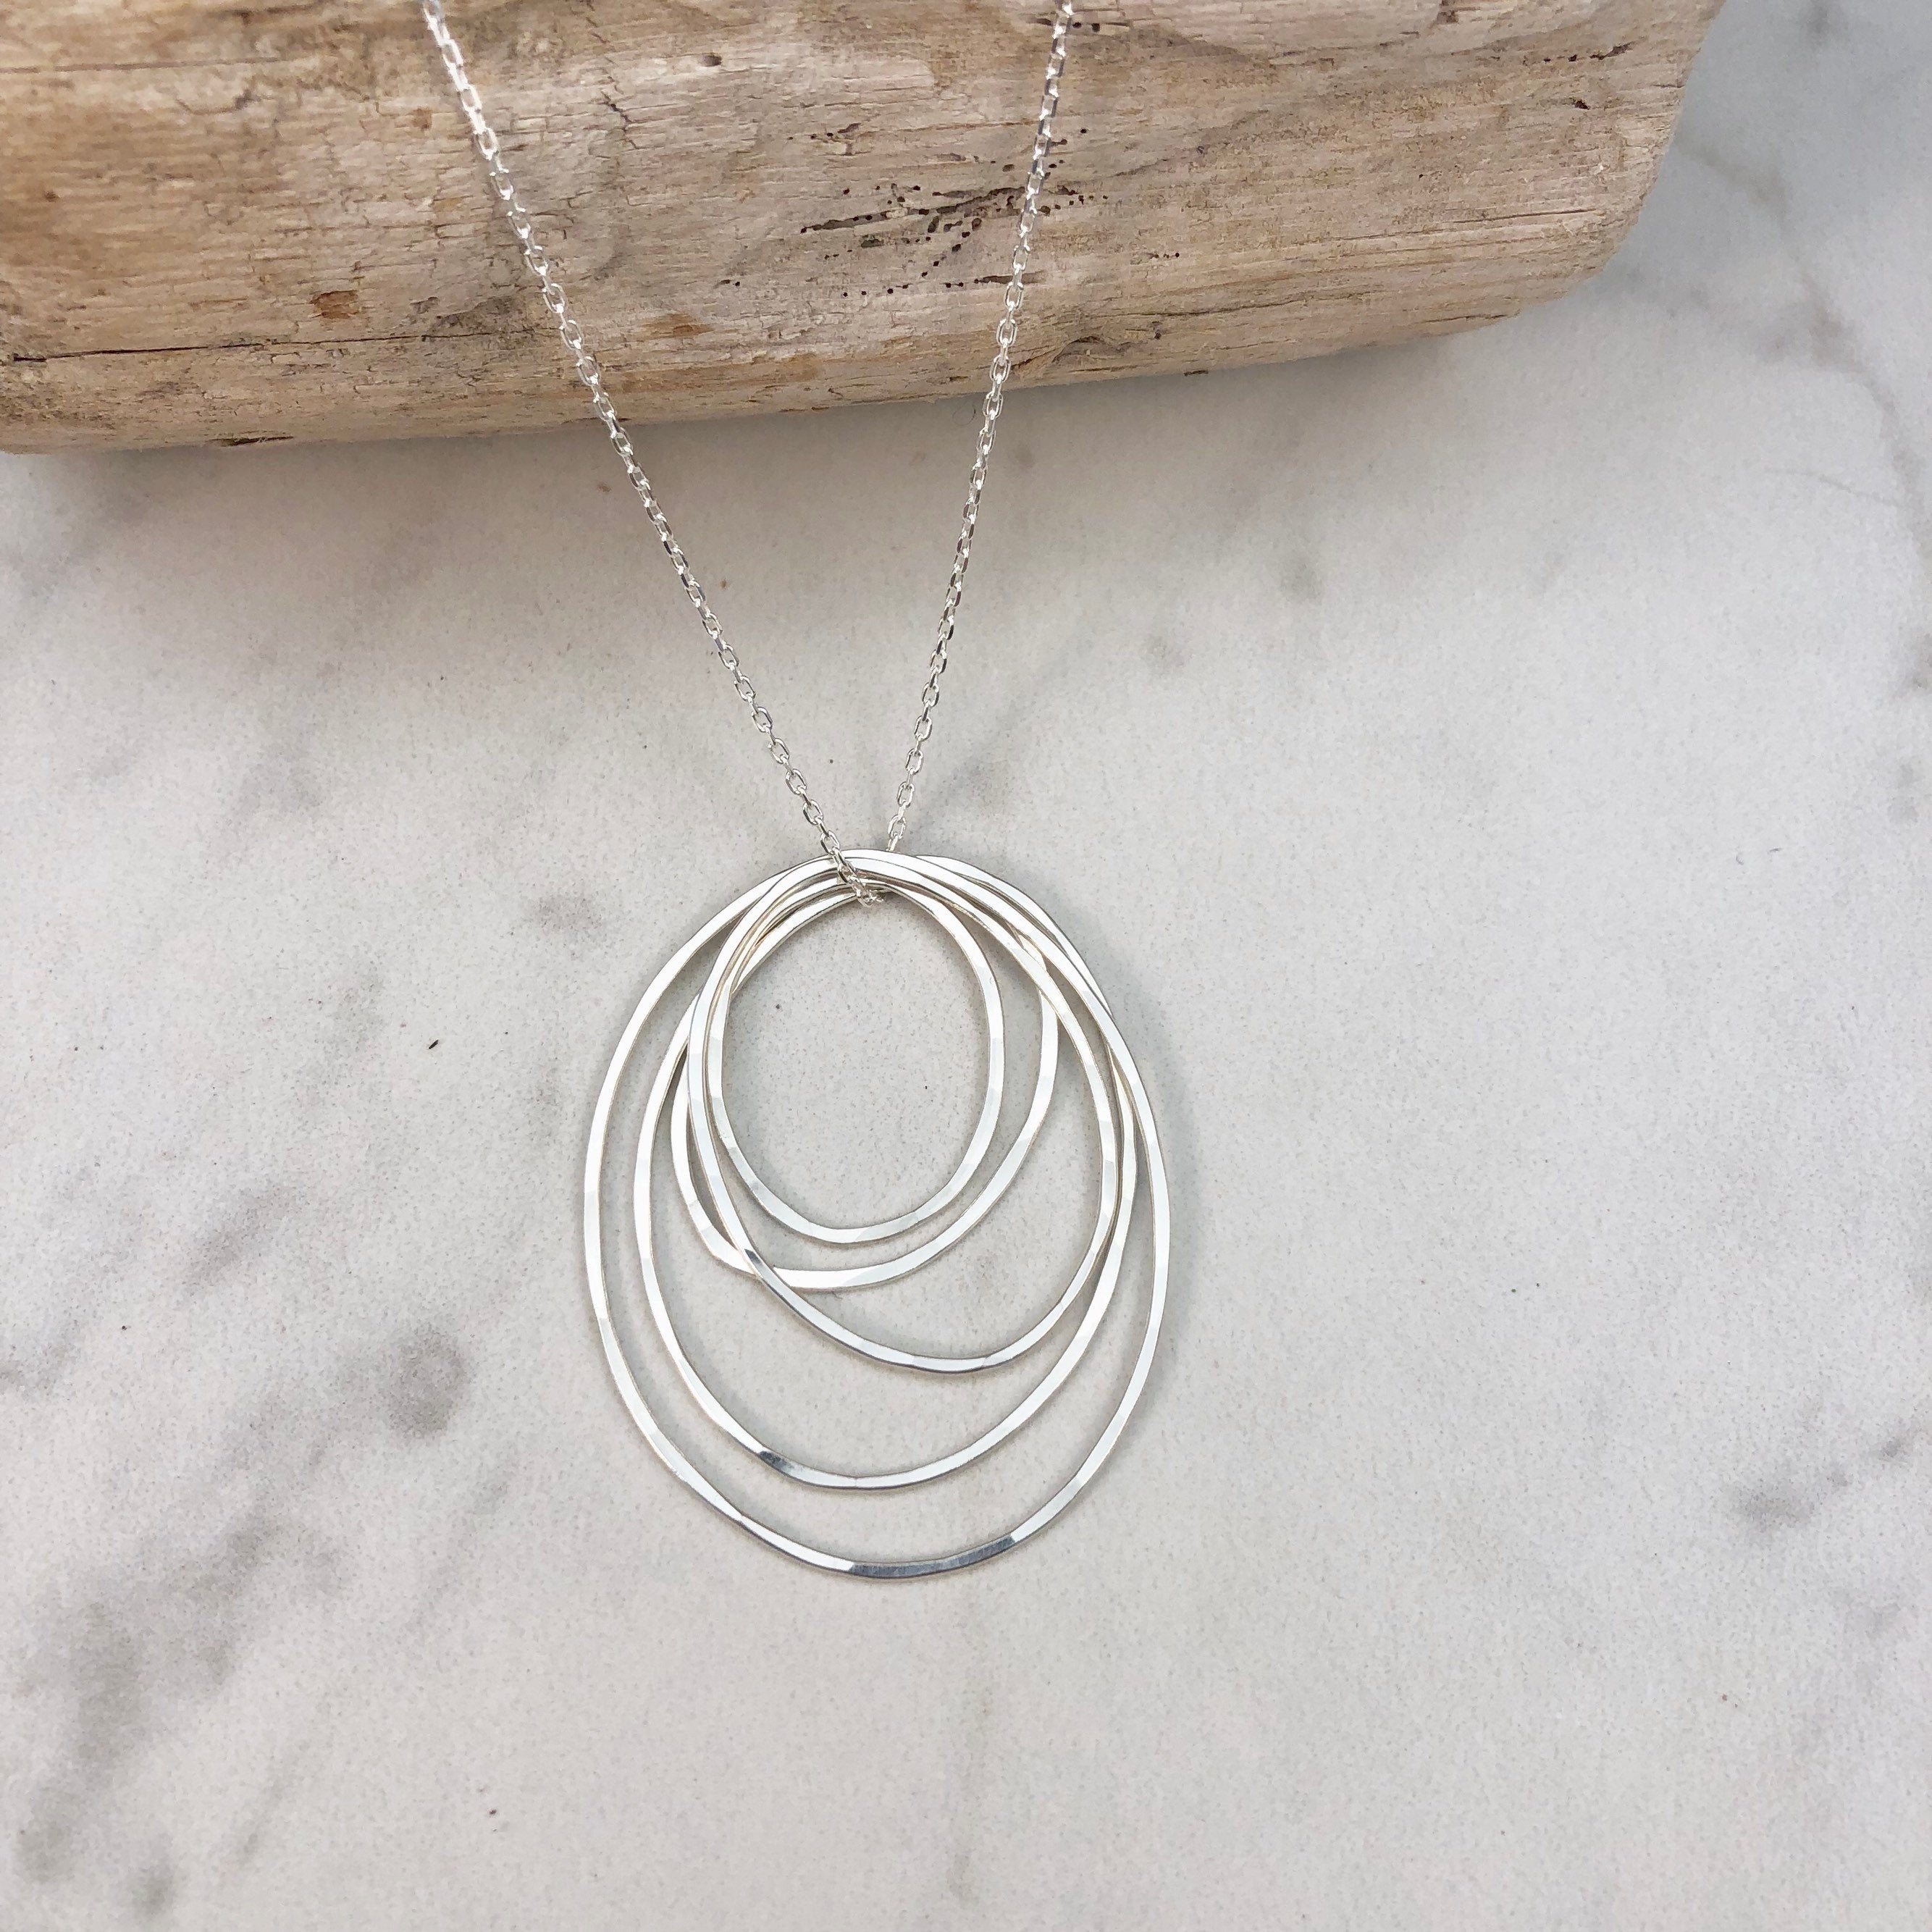 50th Birthday Gift, Sterling Silver 5 Ring Necklace, 50th Jewellery,  Milestone Necklace, Minimalist Necklace, Birthday Gift for Women - Etsy